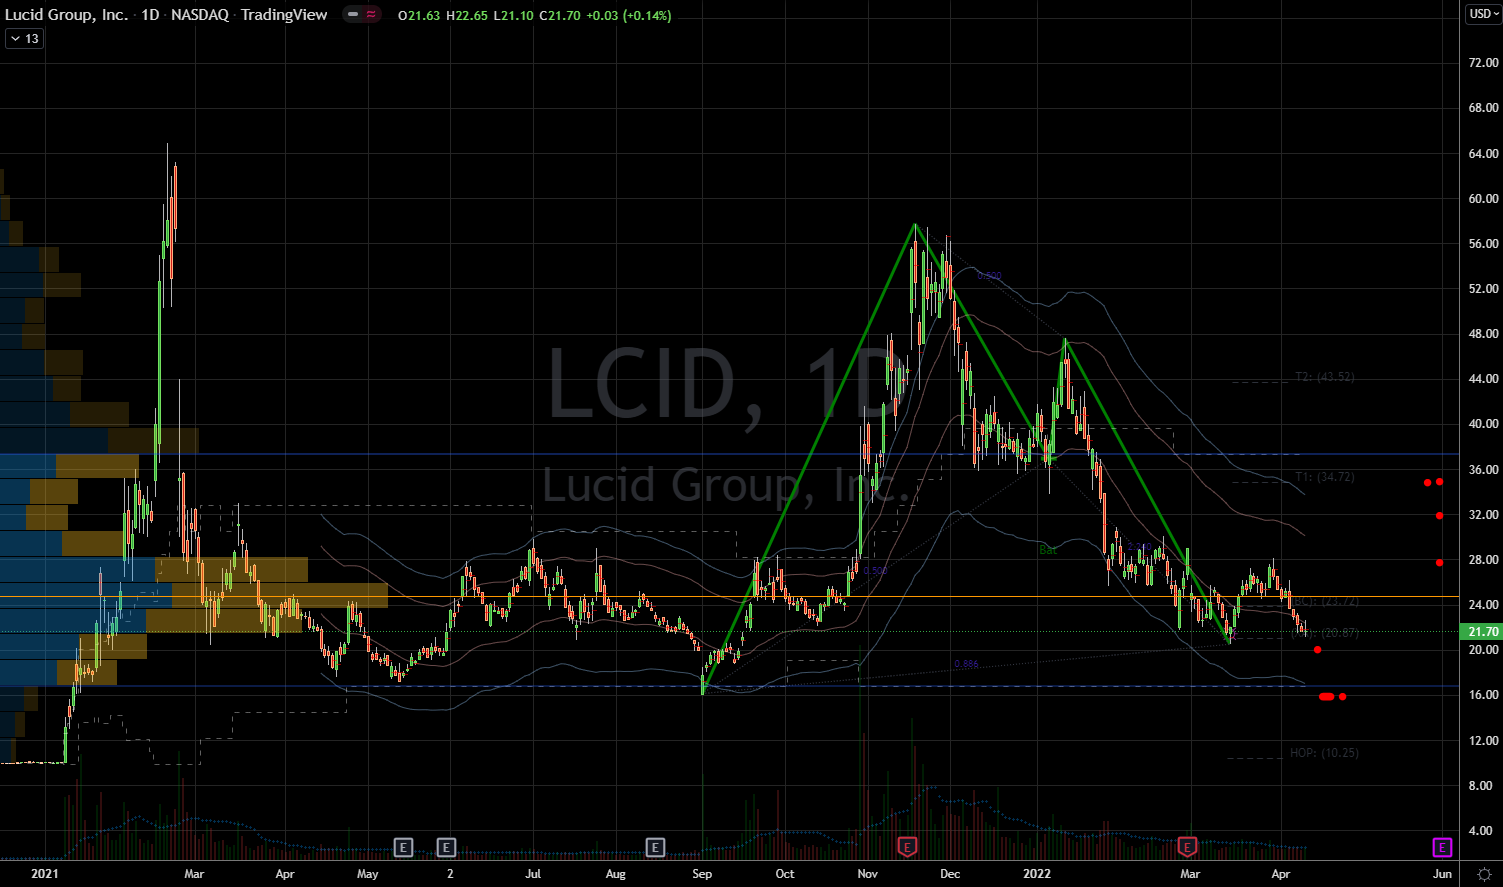 Lucid (LCID) Stock Chart Showing Upside Potential Over Time